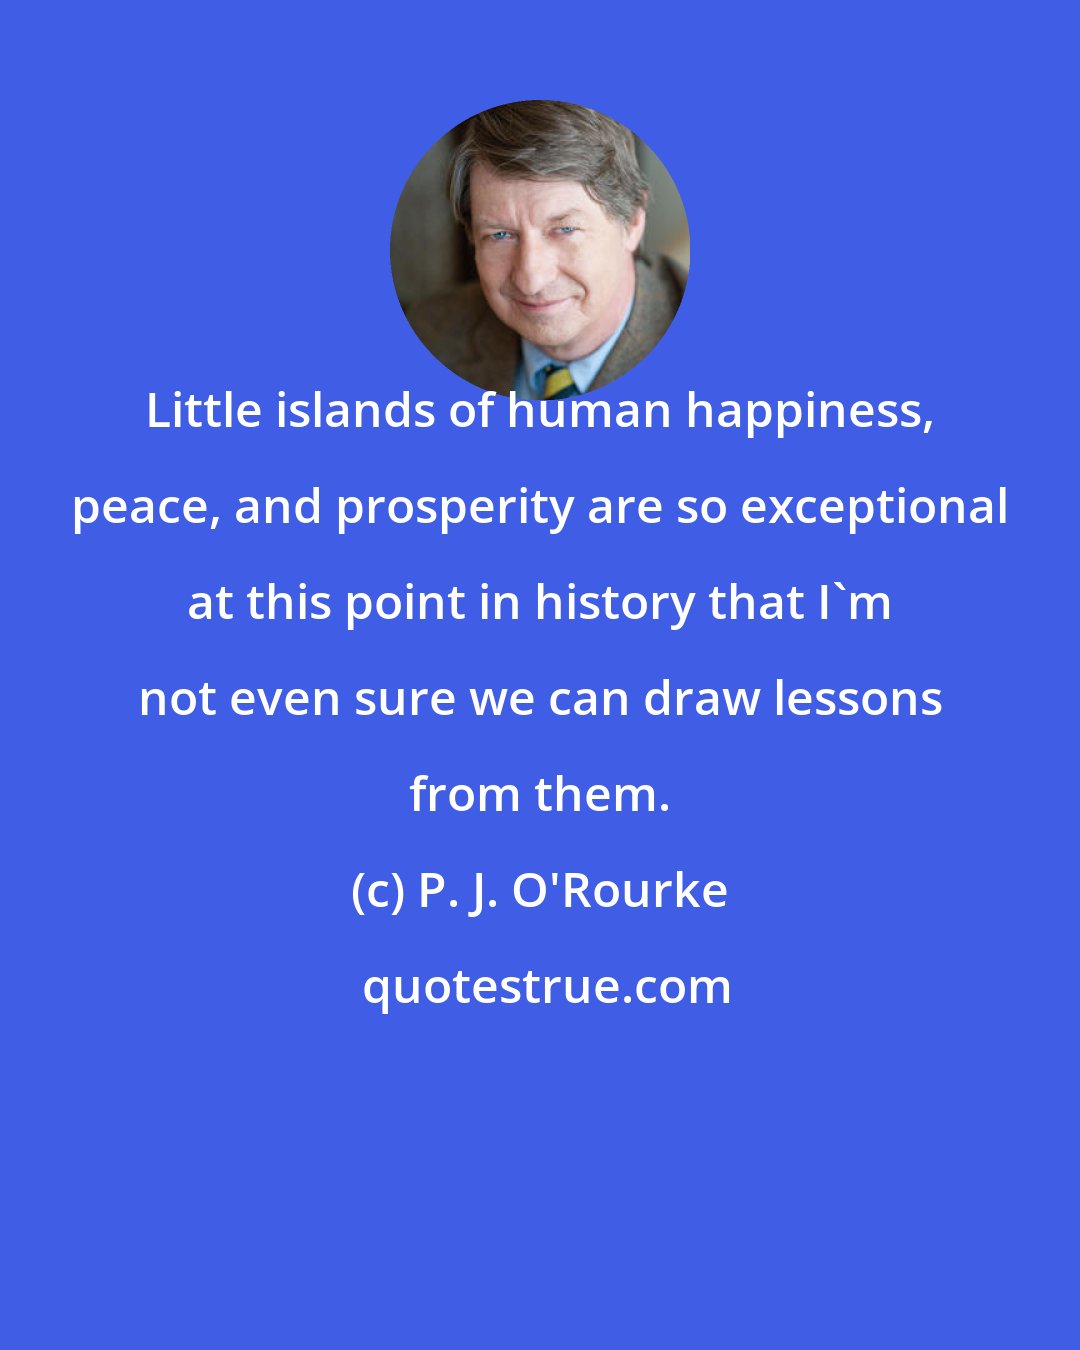 P. J. O'Rourke: Little islands of human happiness, peace, and prosperity are so exceptional at this point in history that I'm not even sure we can draw lessons from them.